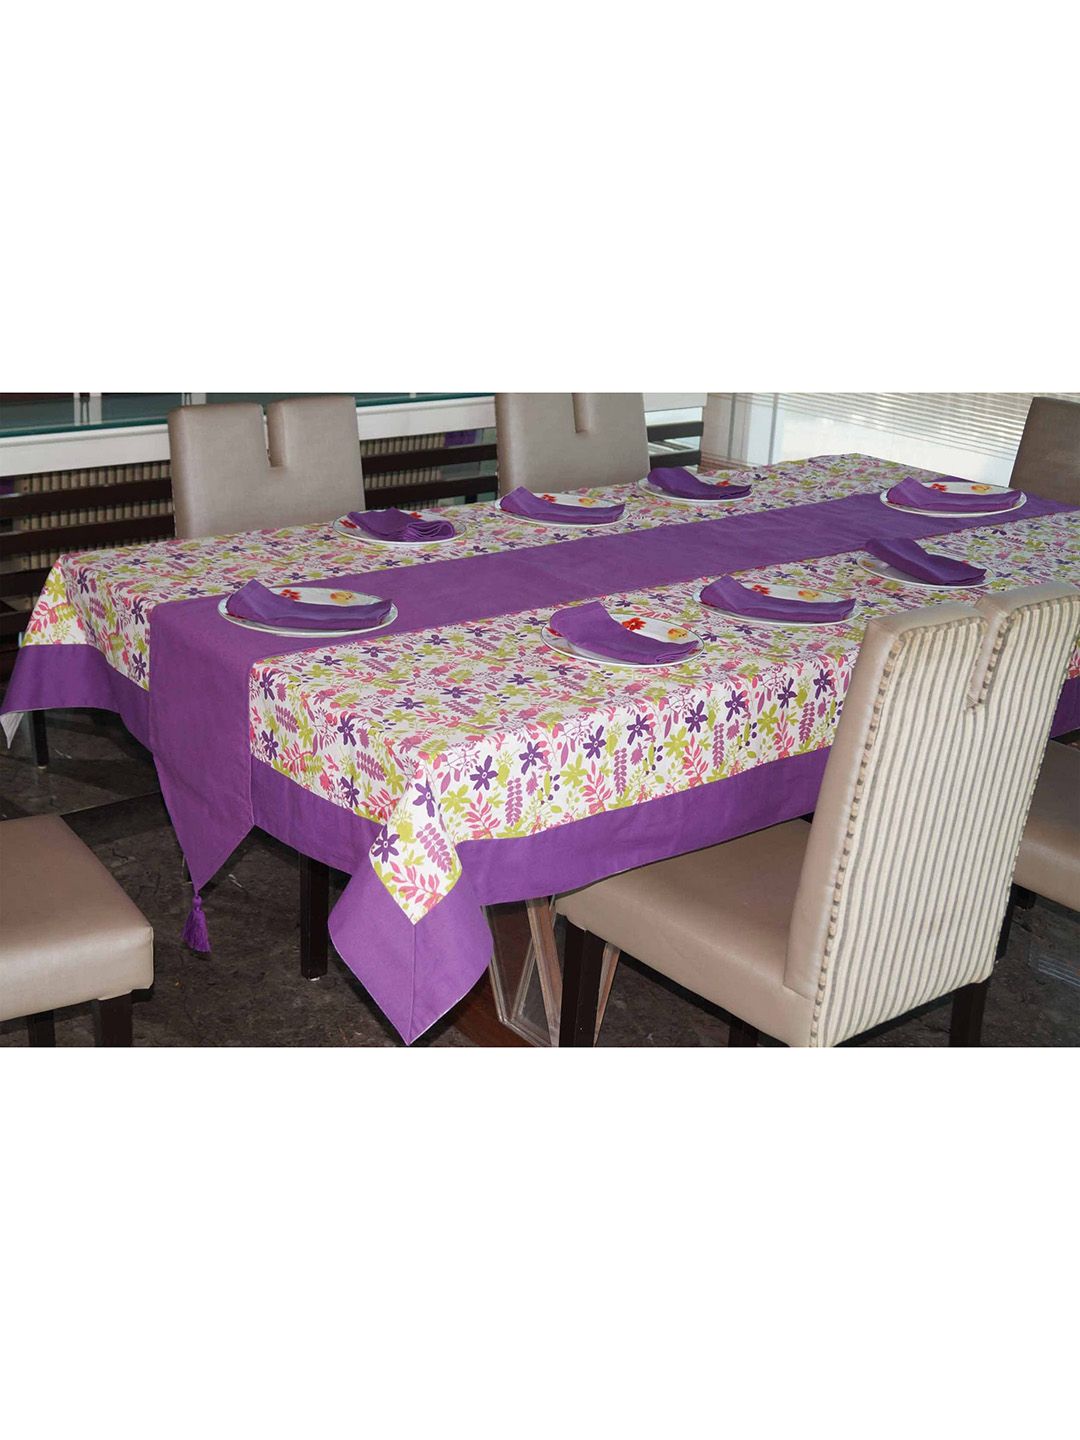 Lushomes Set Of 10 Purple Printed Cotton Dining Table Linen Sets Price in India